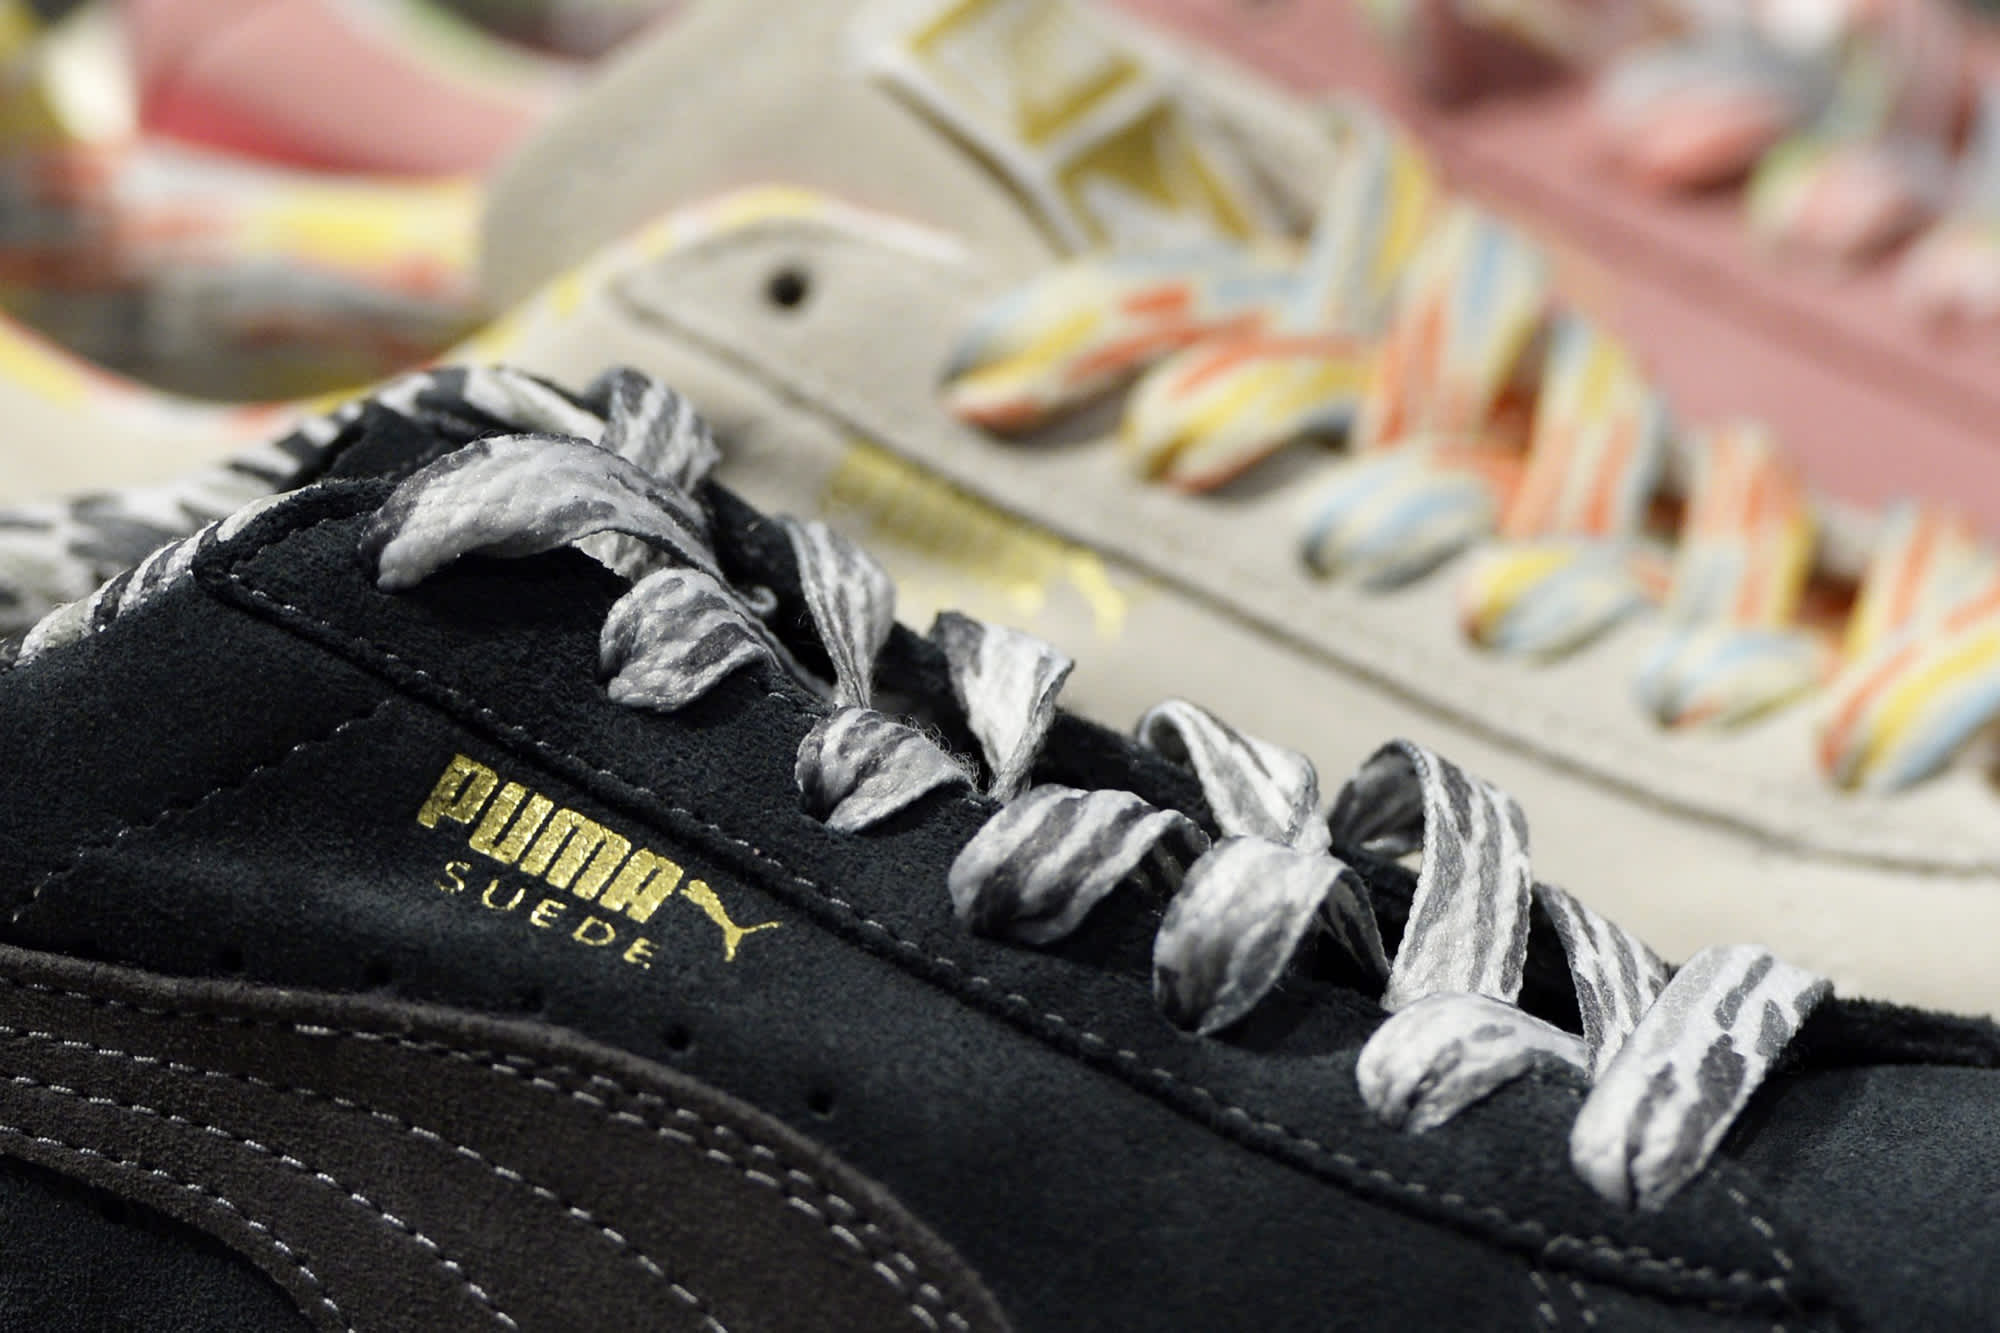 Luxury group Kering to spin off Puma to 